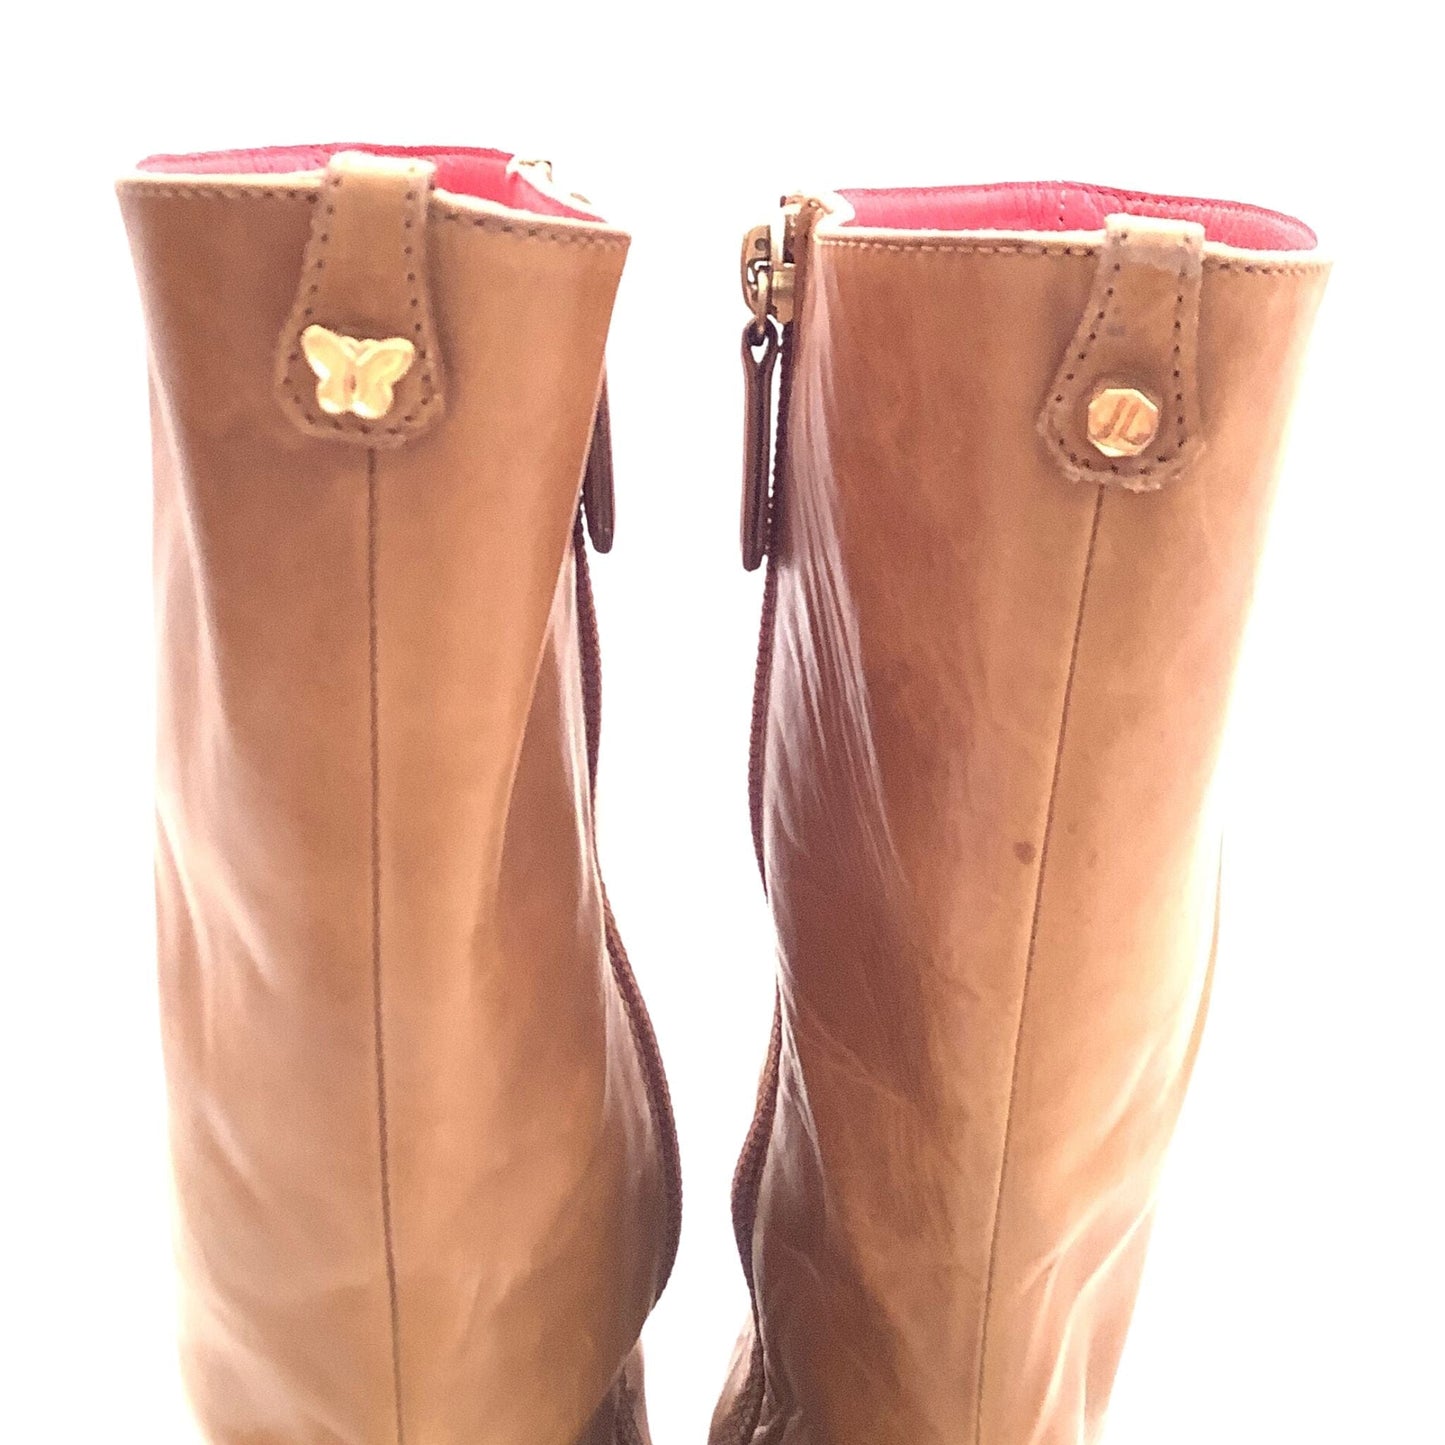 Judith Leiber Ankle Boots 7 / Tan / Y2K - Now